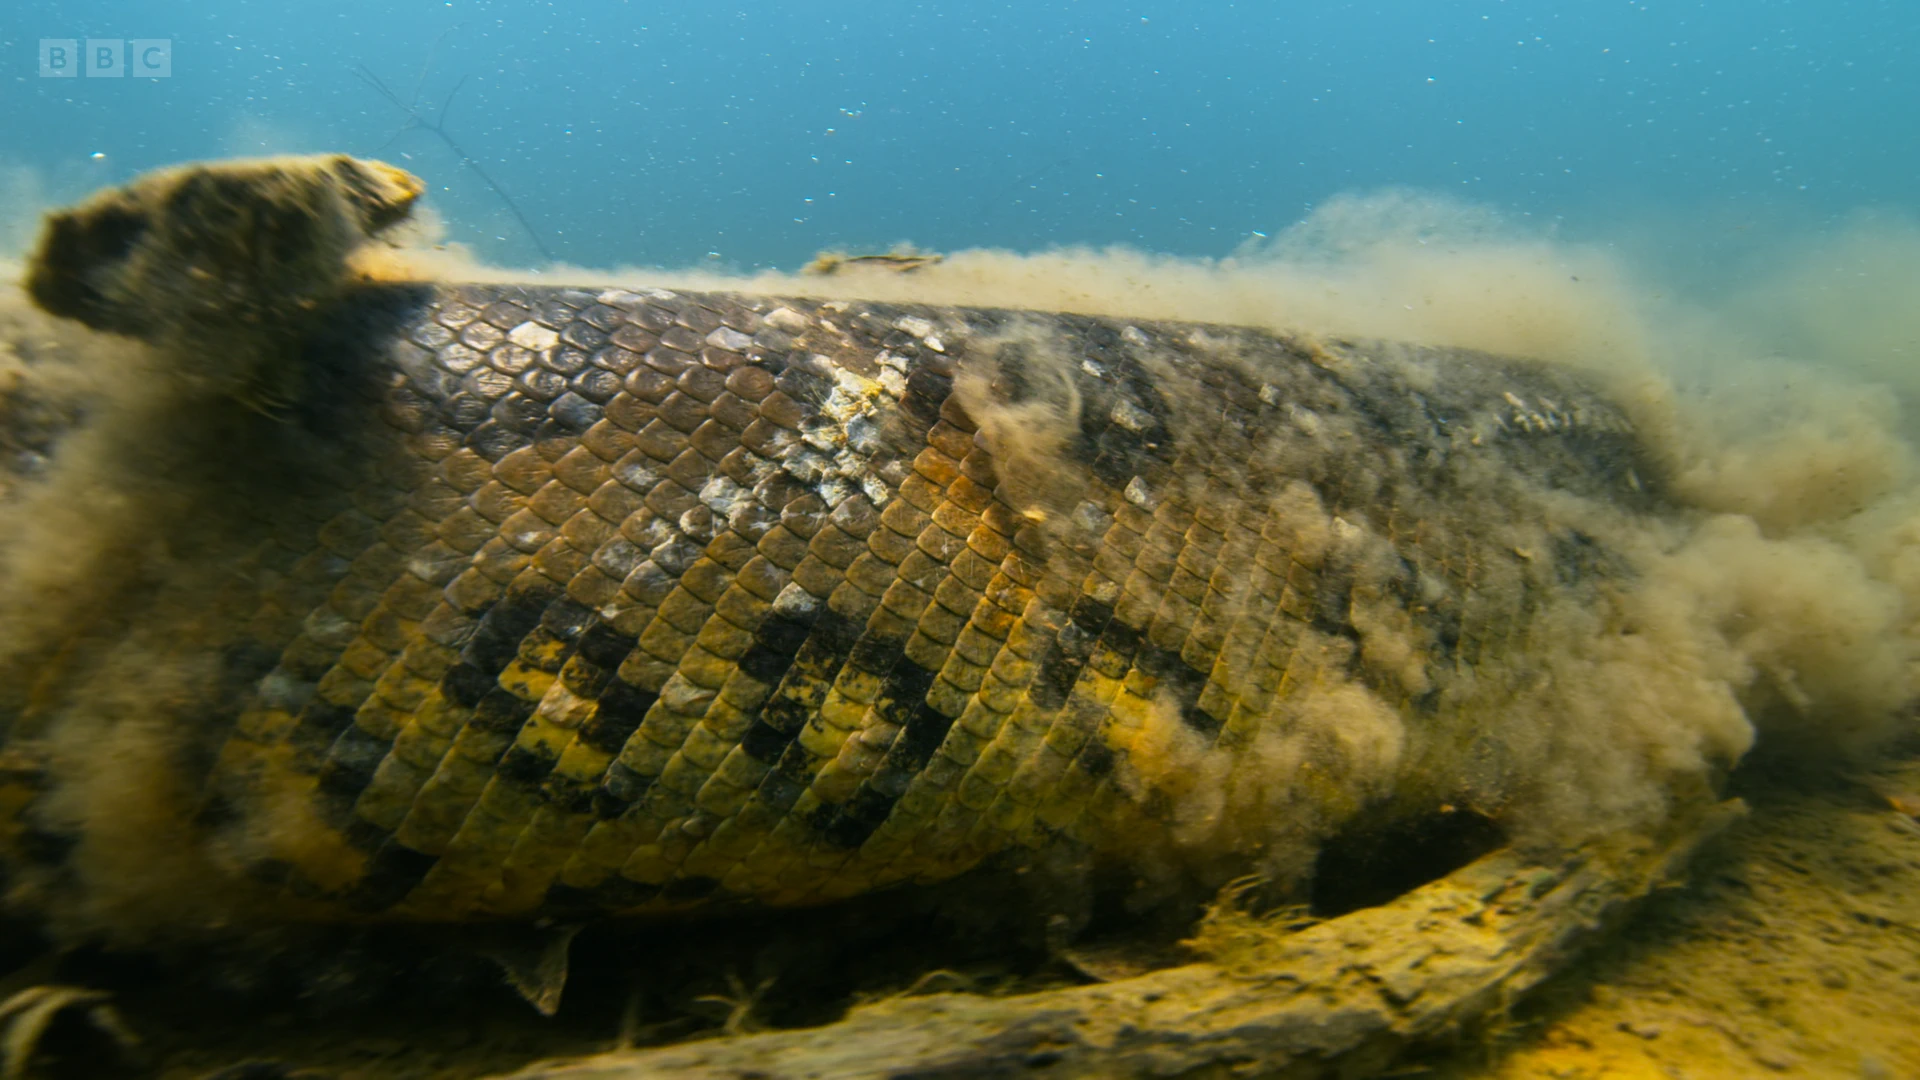 Green anaconda (Eunectes murinus) as shown in Seven Worlds, One Planet - South America